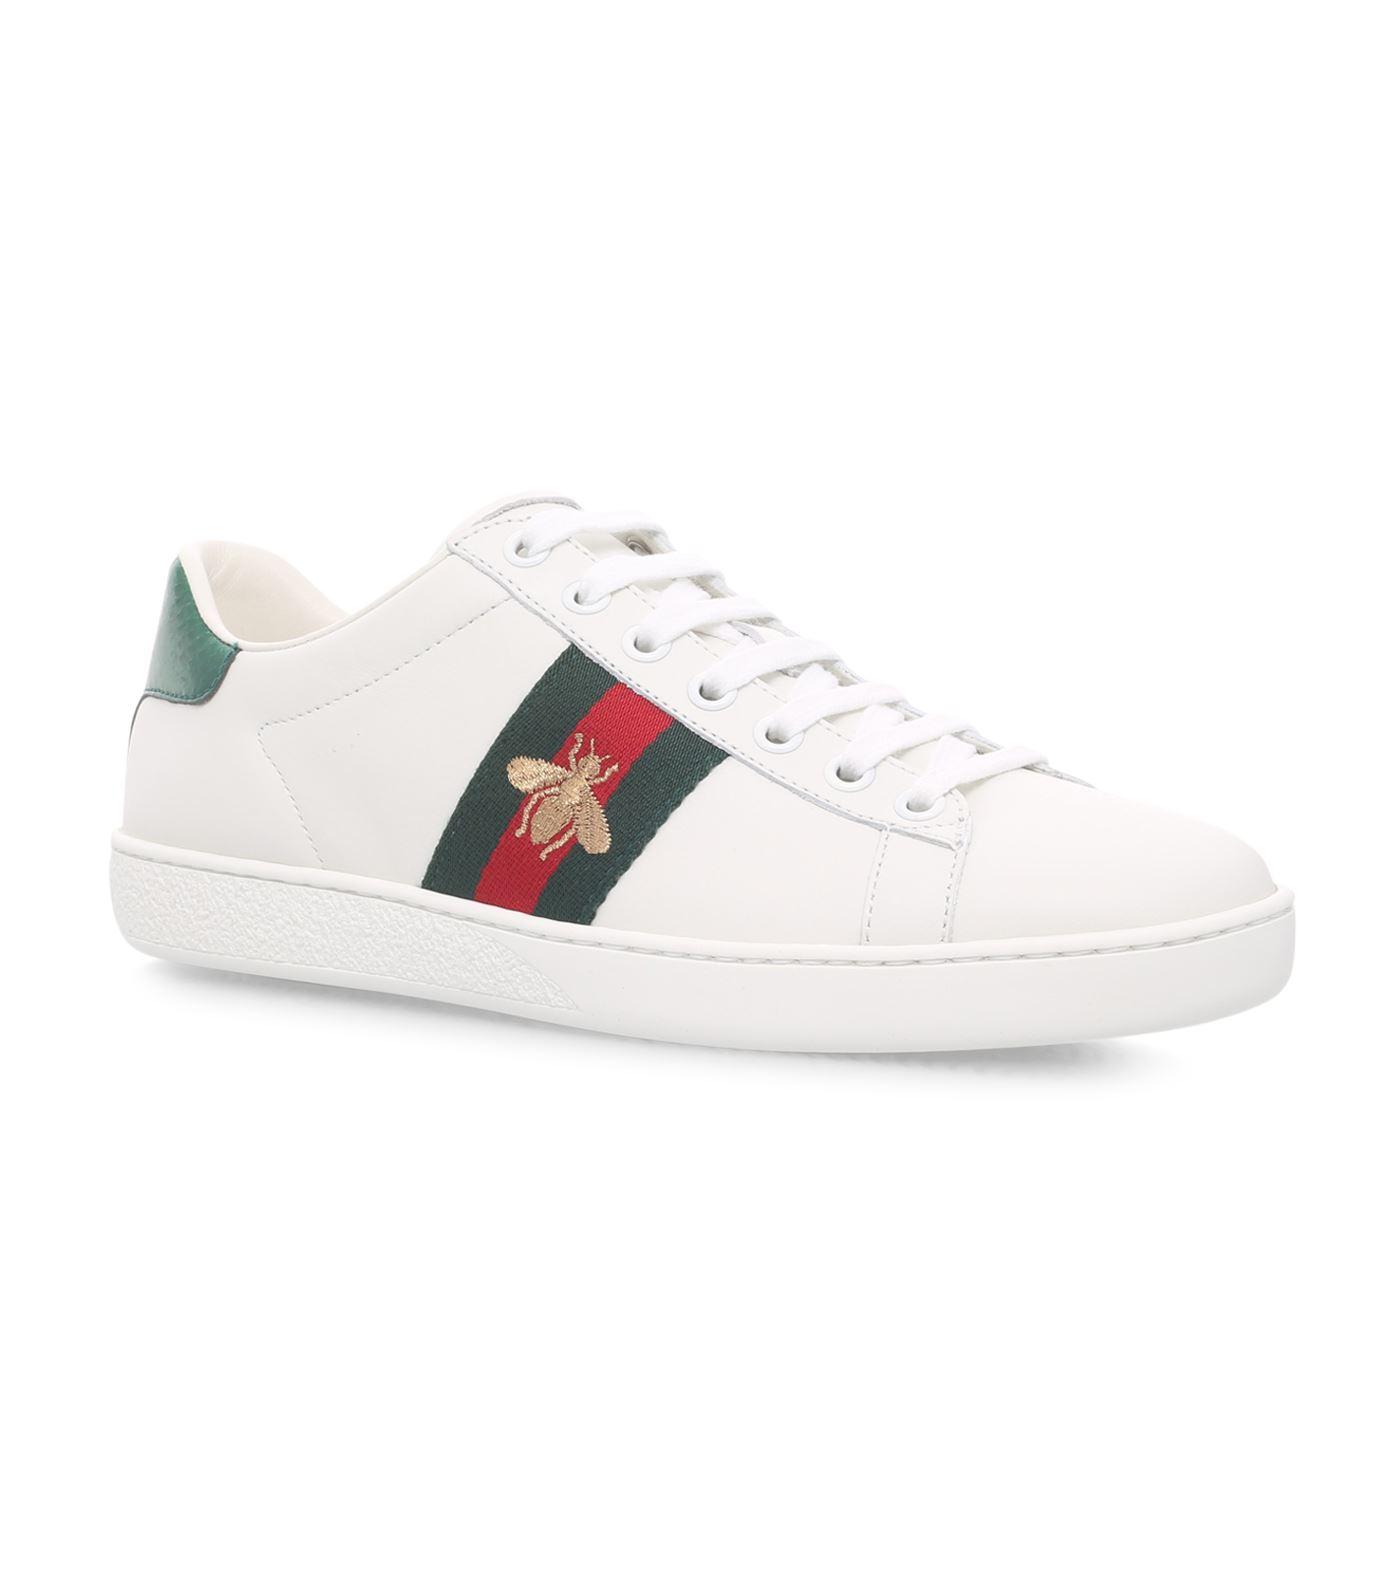 Gucci Denim New Ace Bee Low Sneakers in White - Lyst